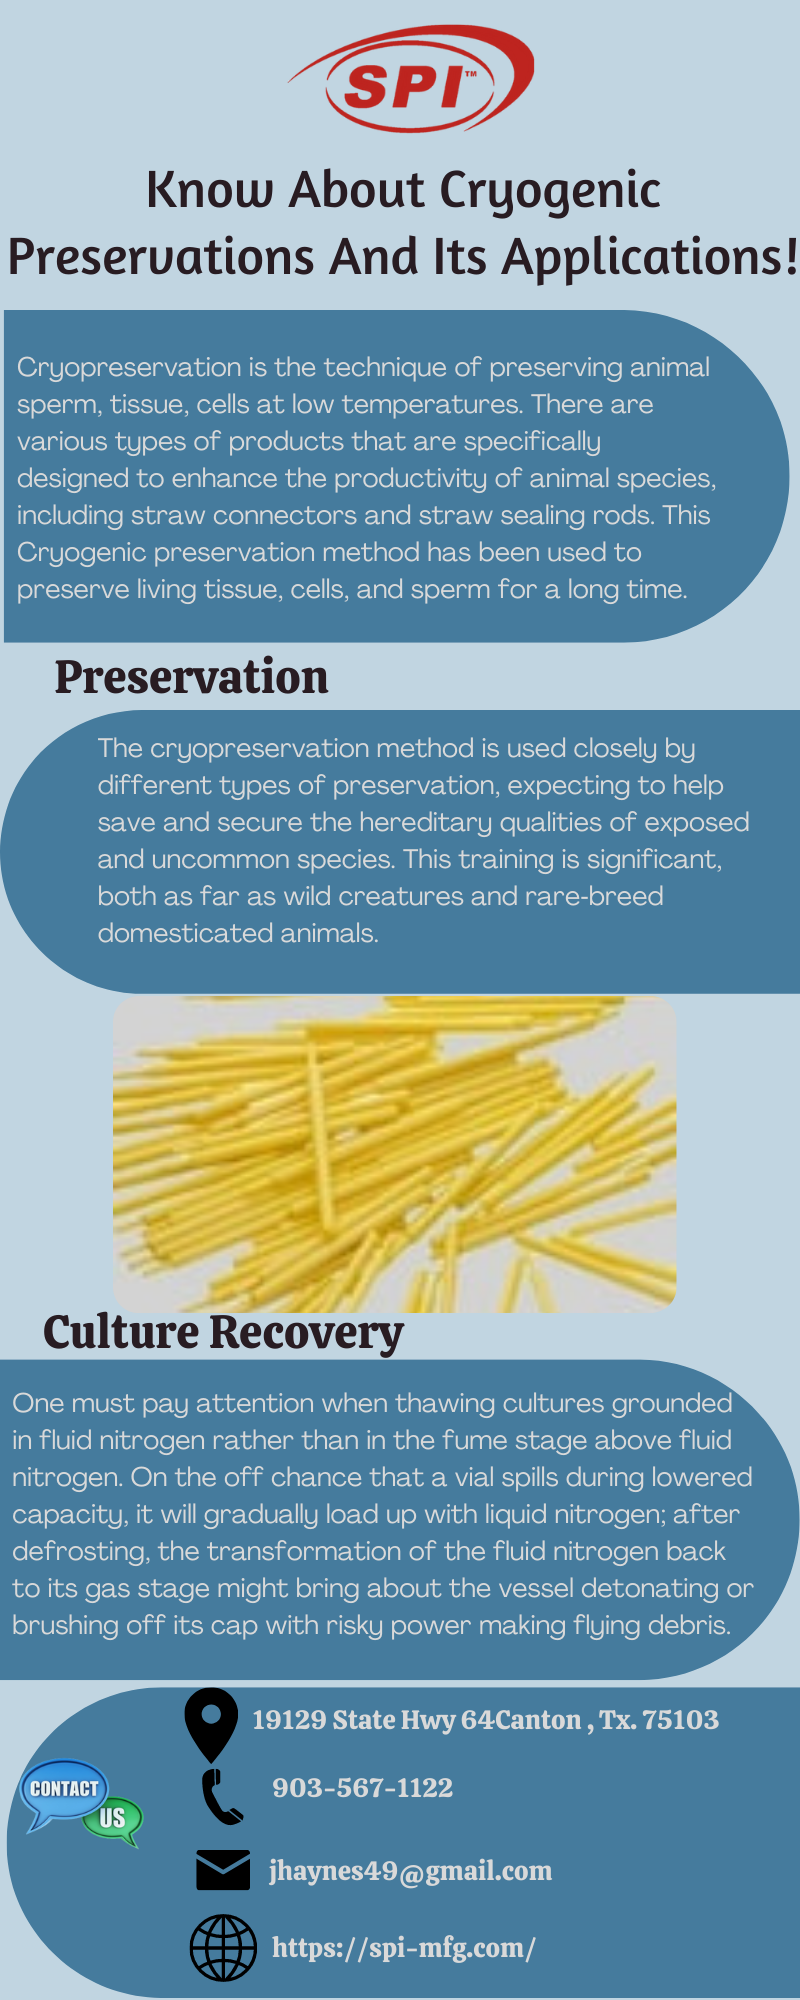 Know About Cryogenic Preservations And Its Applications!